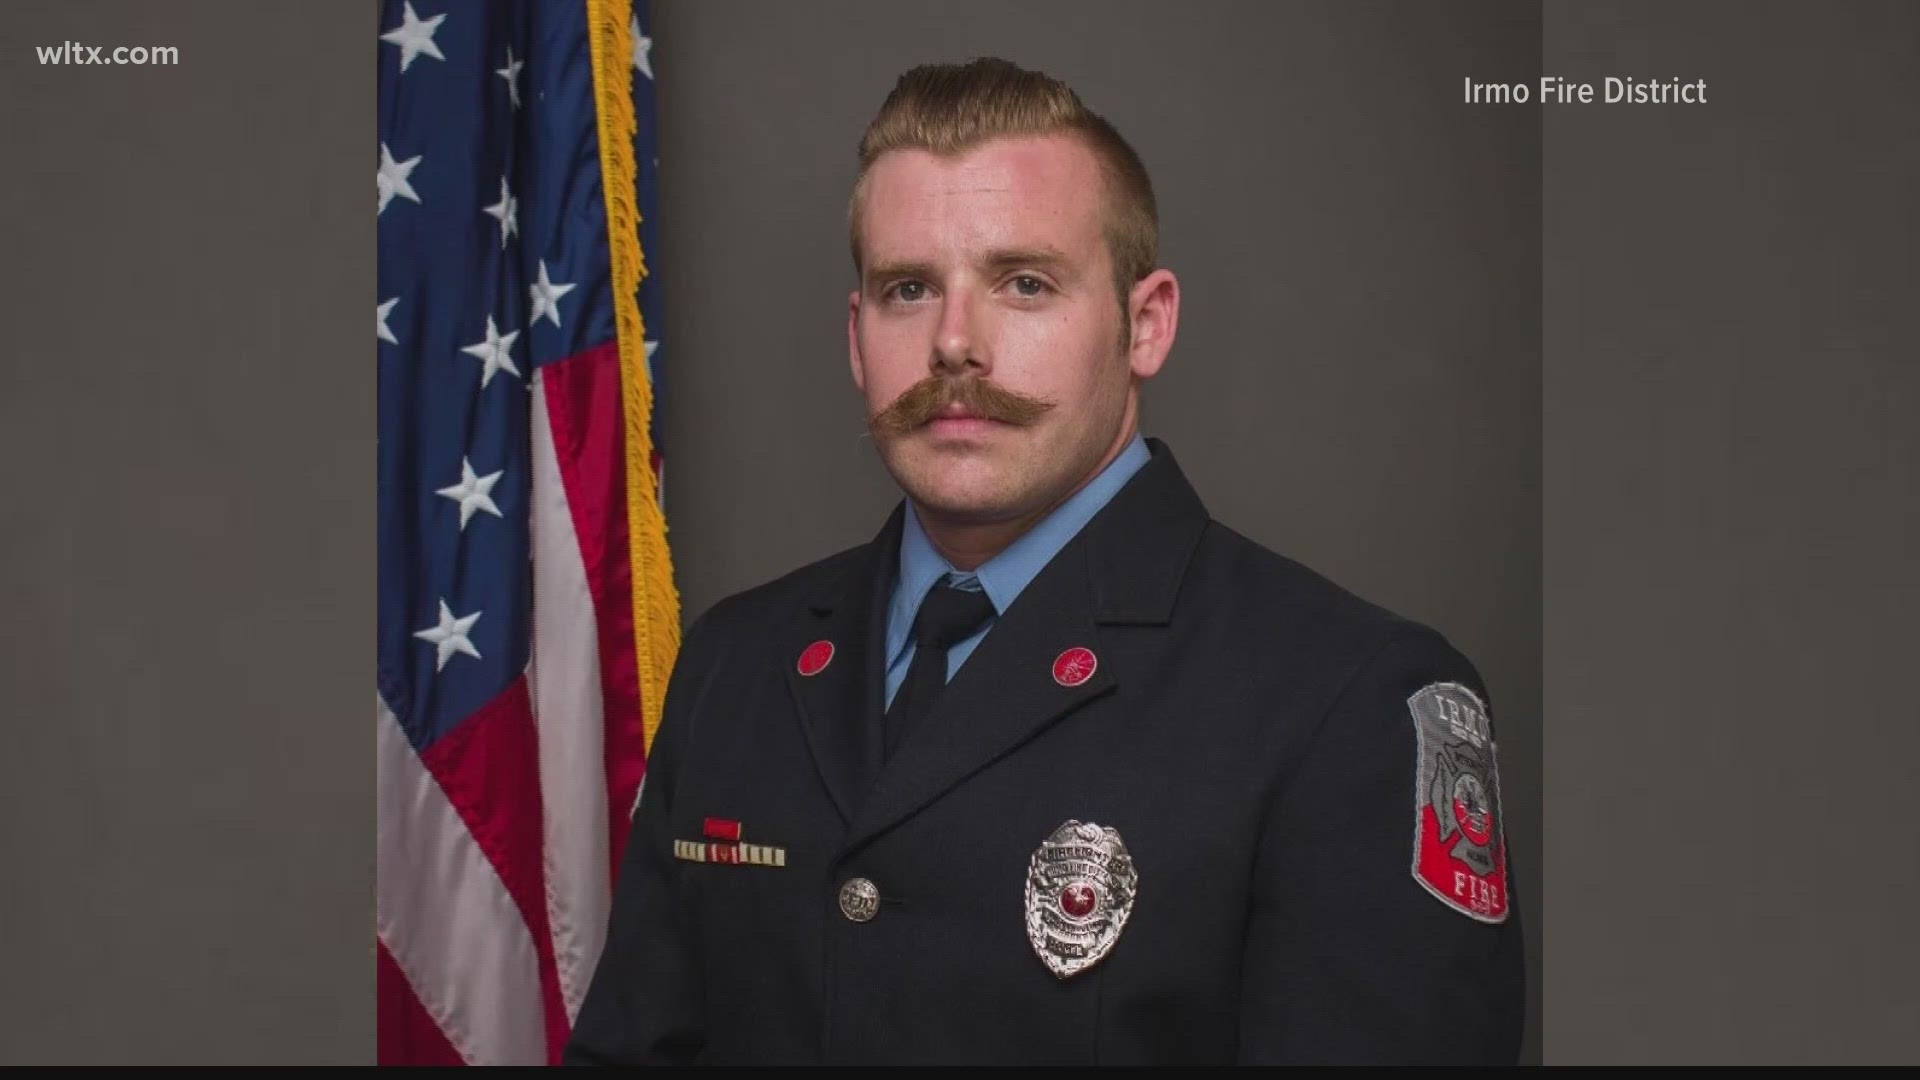 A group is offering specialized emotional support to Irmo firefighters following the death of Firefighter James Muller.